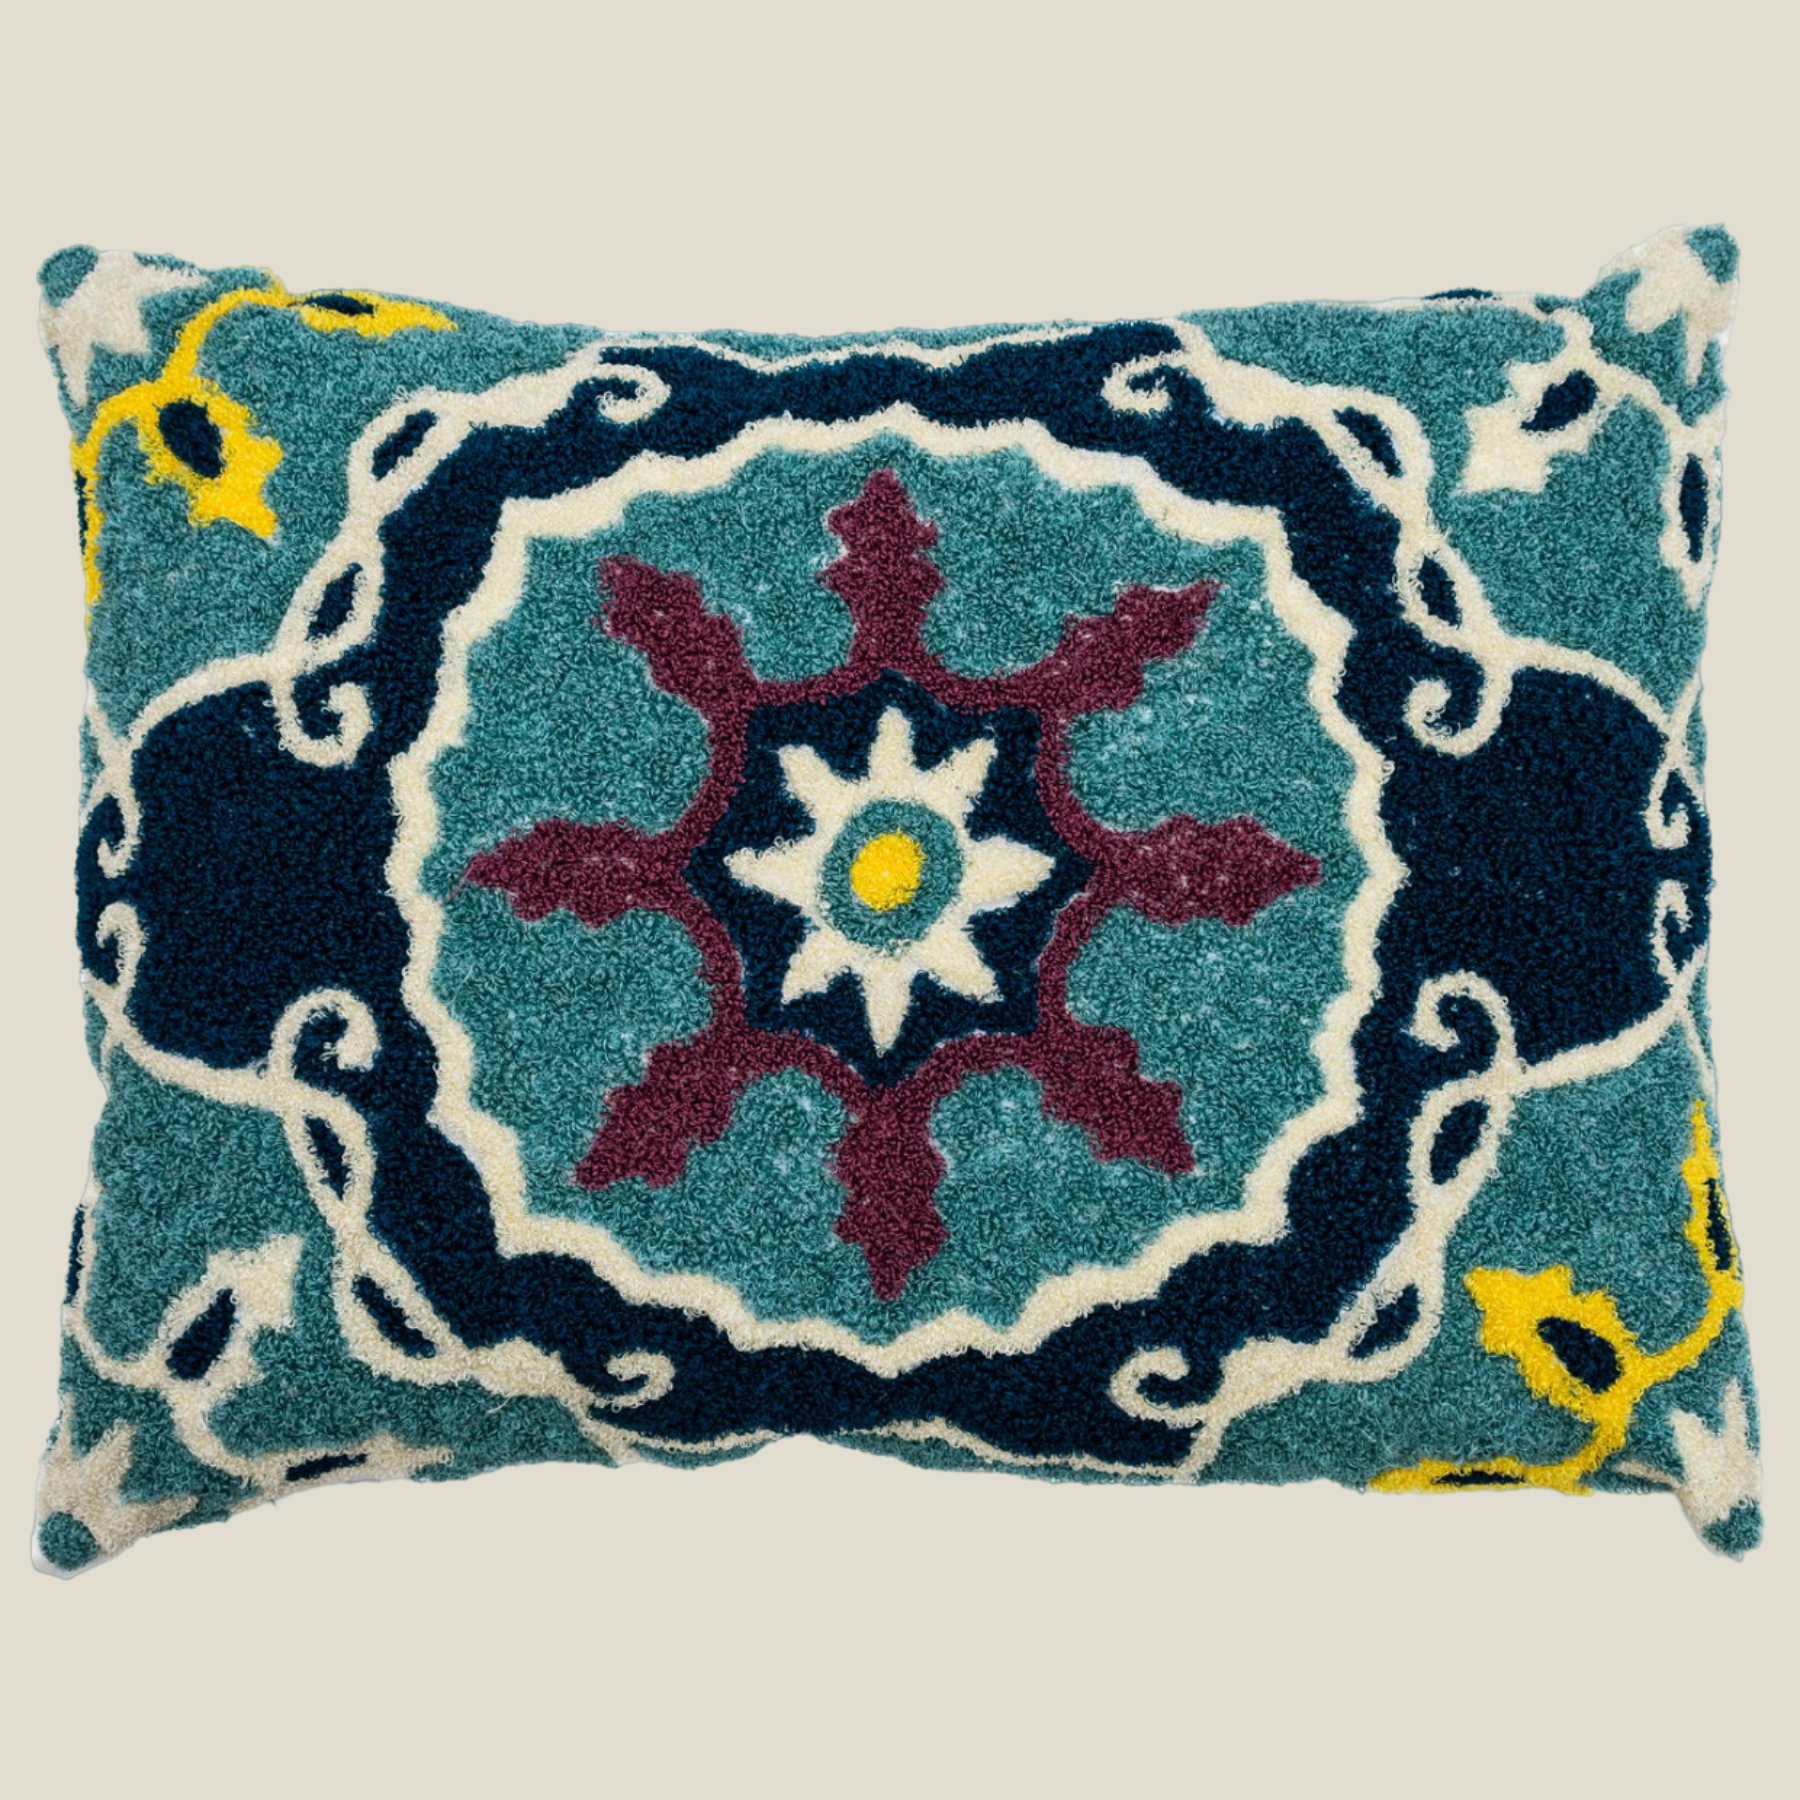 The Luxelife Multicolor Ruffled Floral Cotton Fully Embroidered Cushion Cover